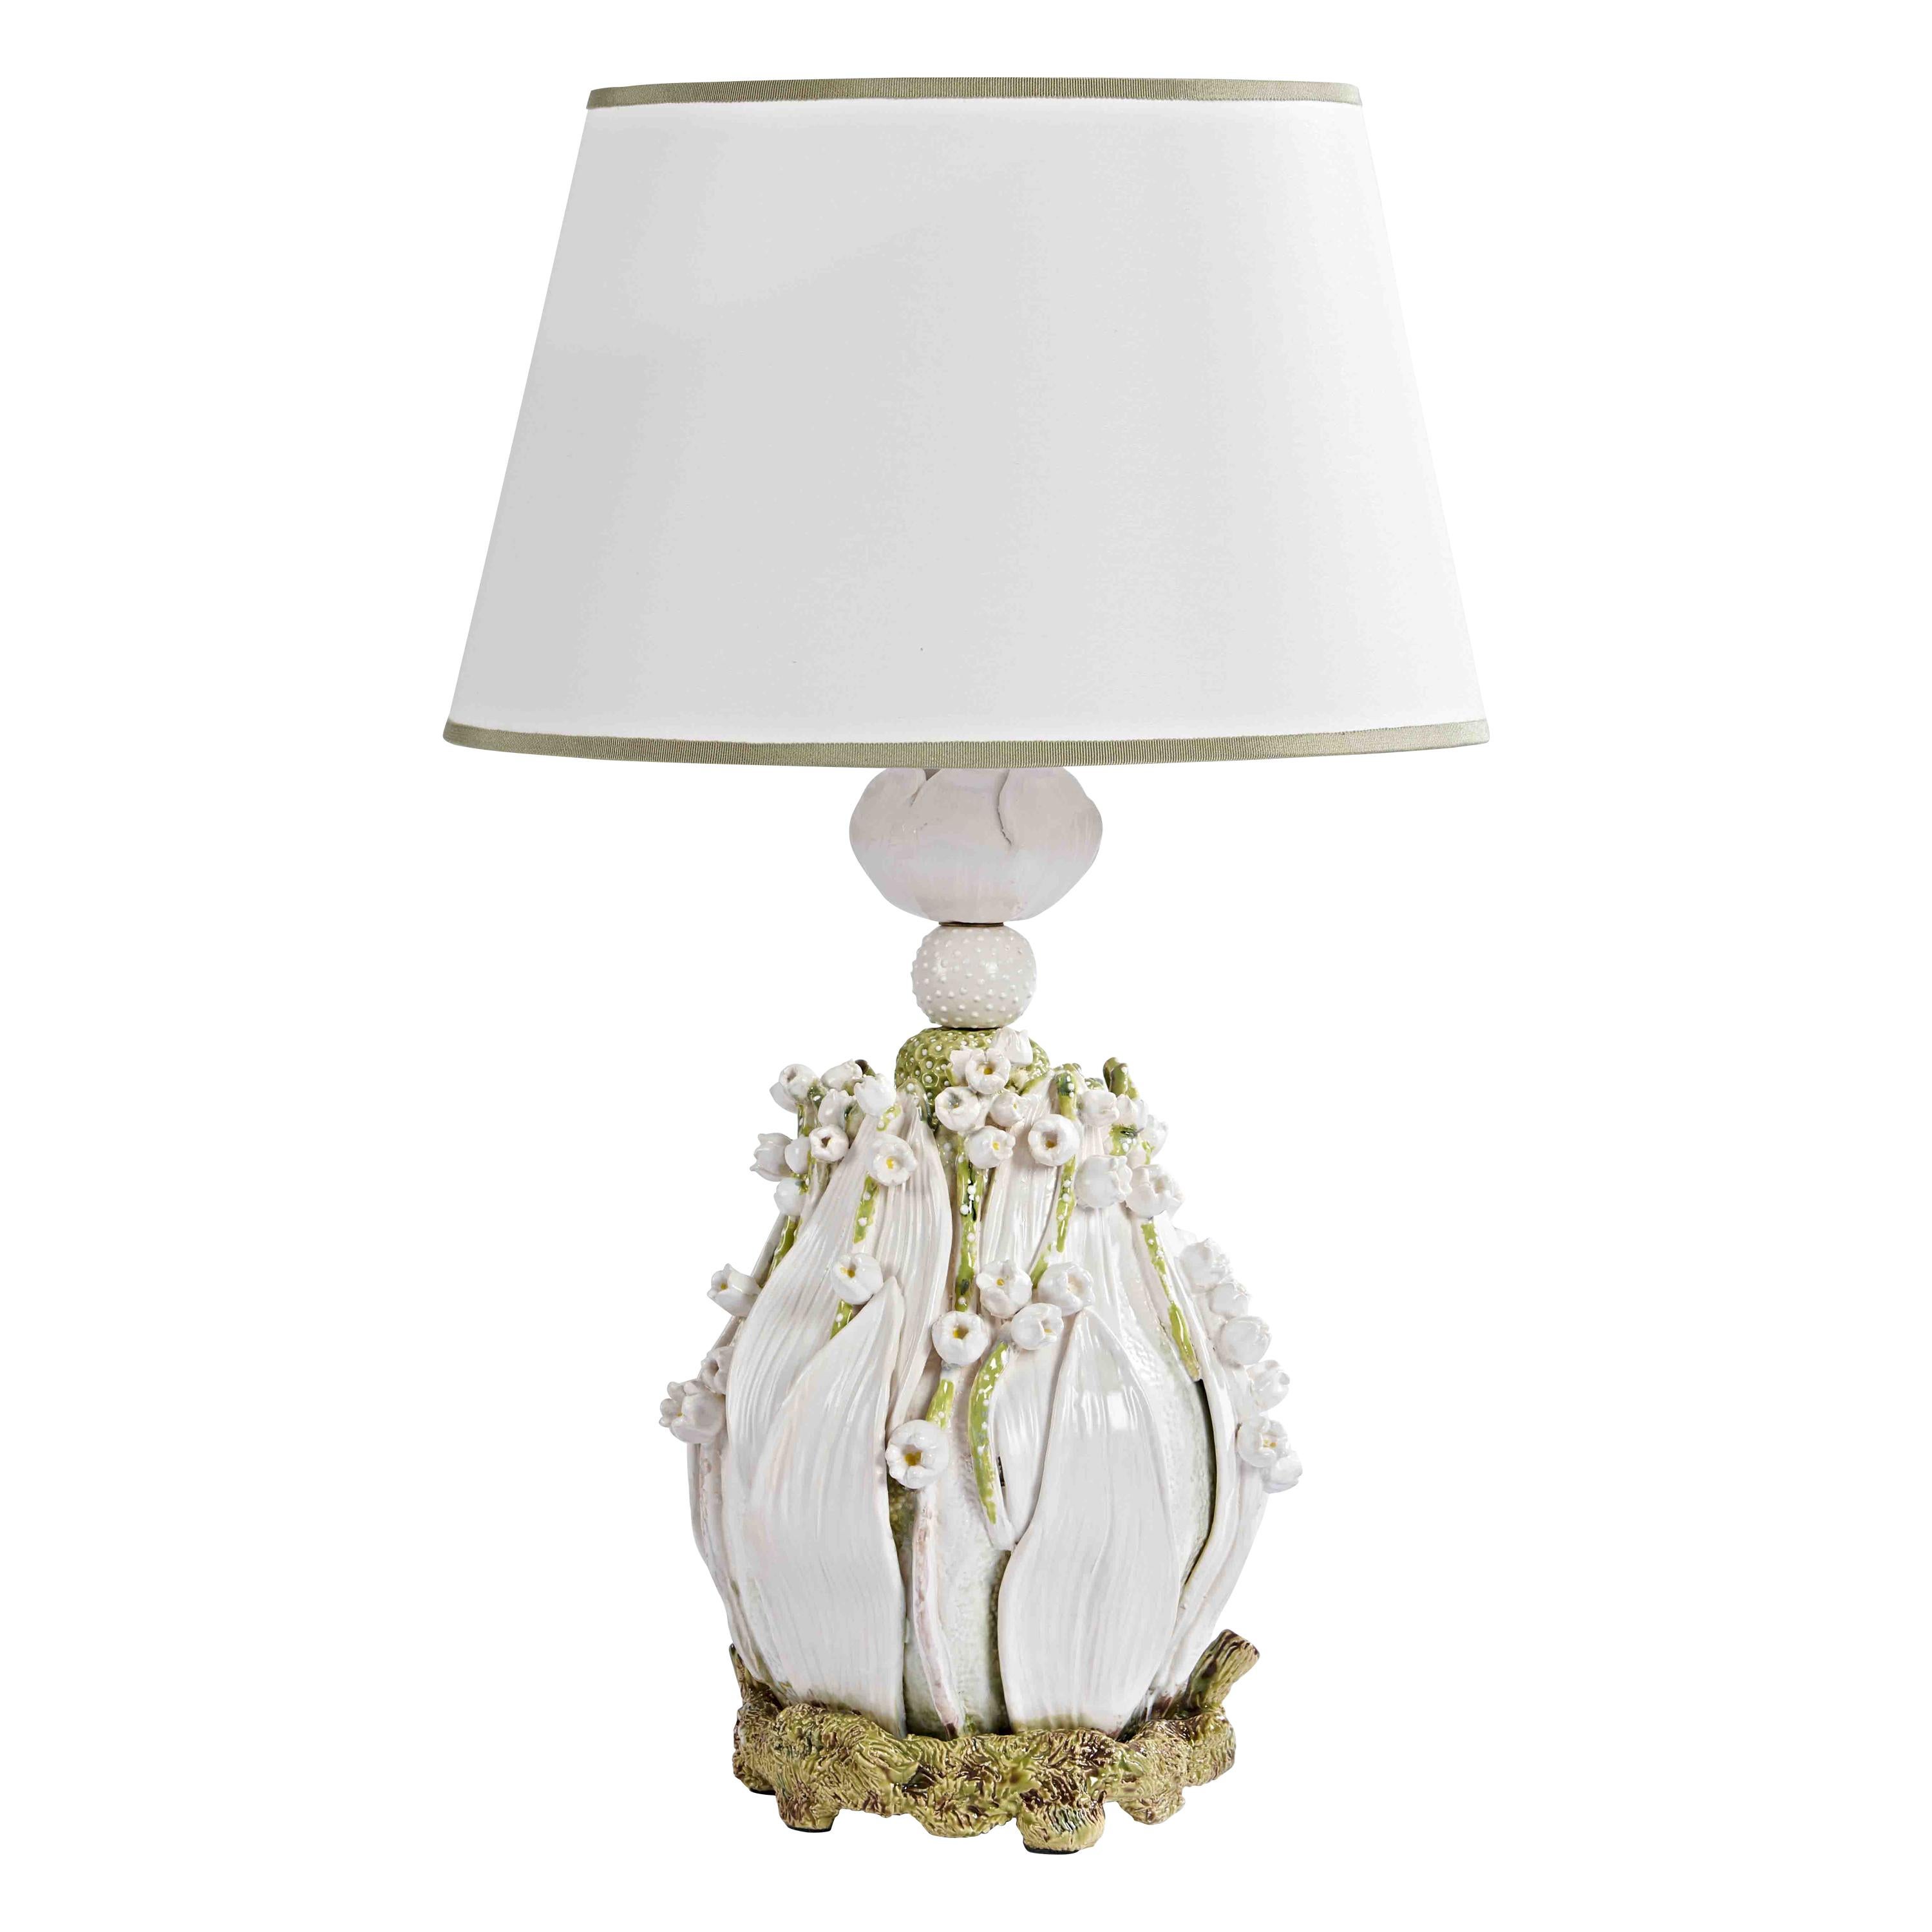 "Lily of the Valley" Lamp, Véronique Rivemale, One of a Kind Piece For Sale